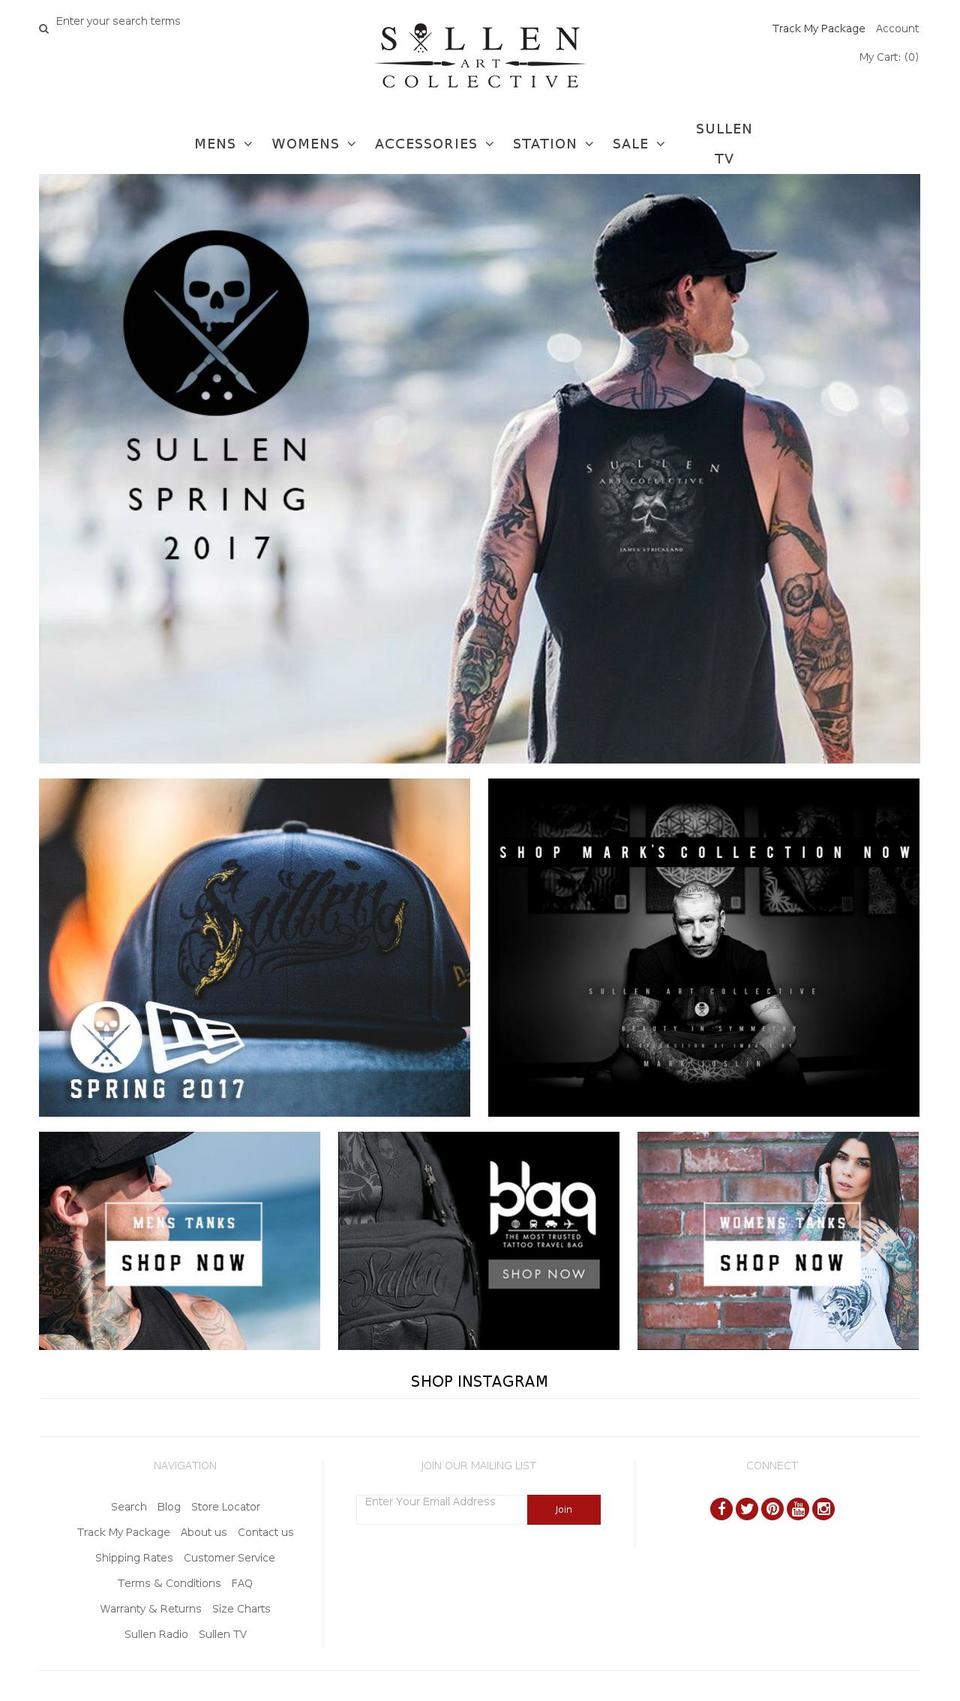 Tailor Shopify theme site example sullenclothing.myshopify.com